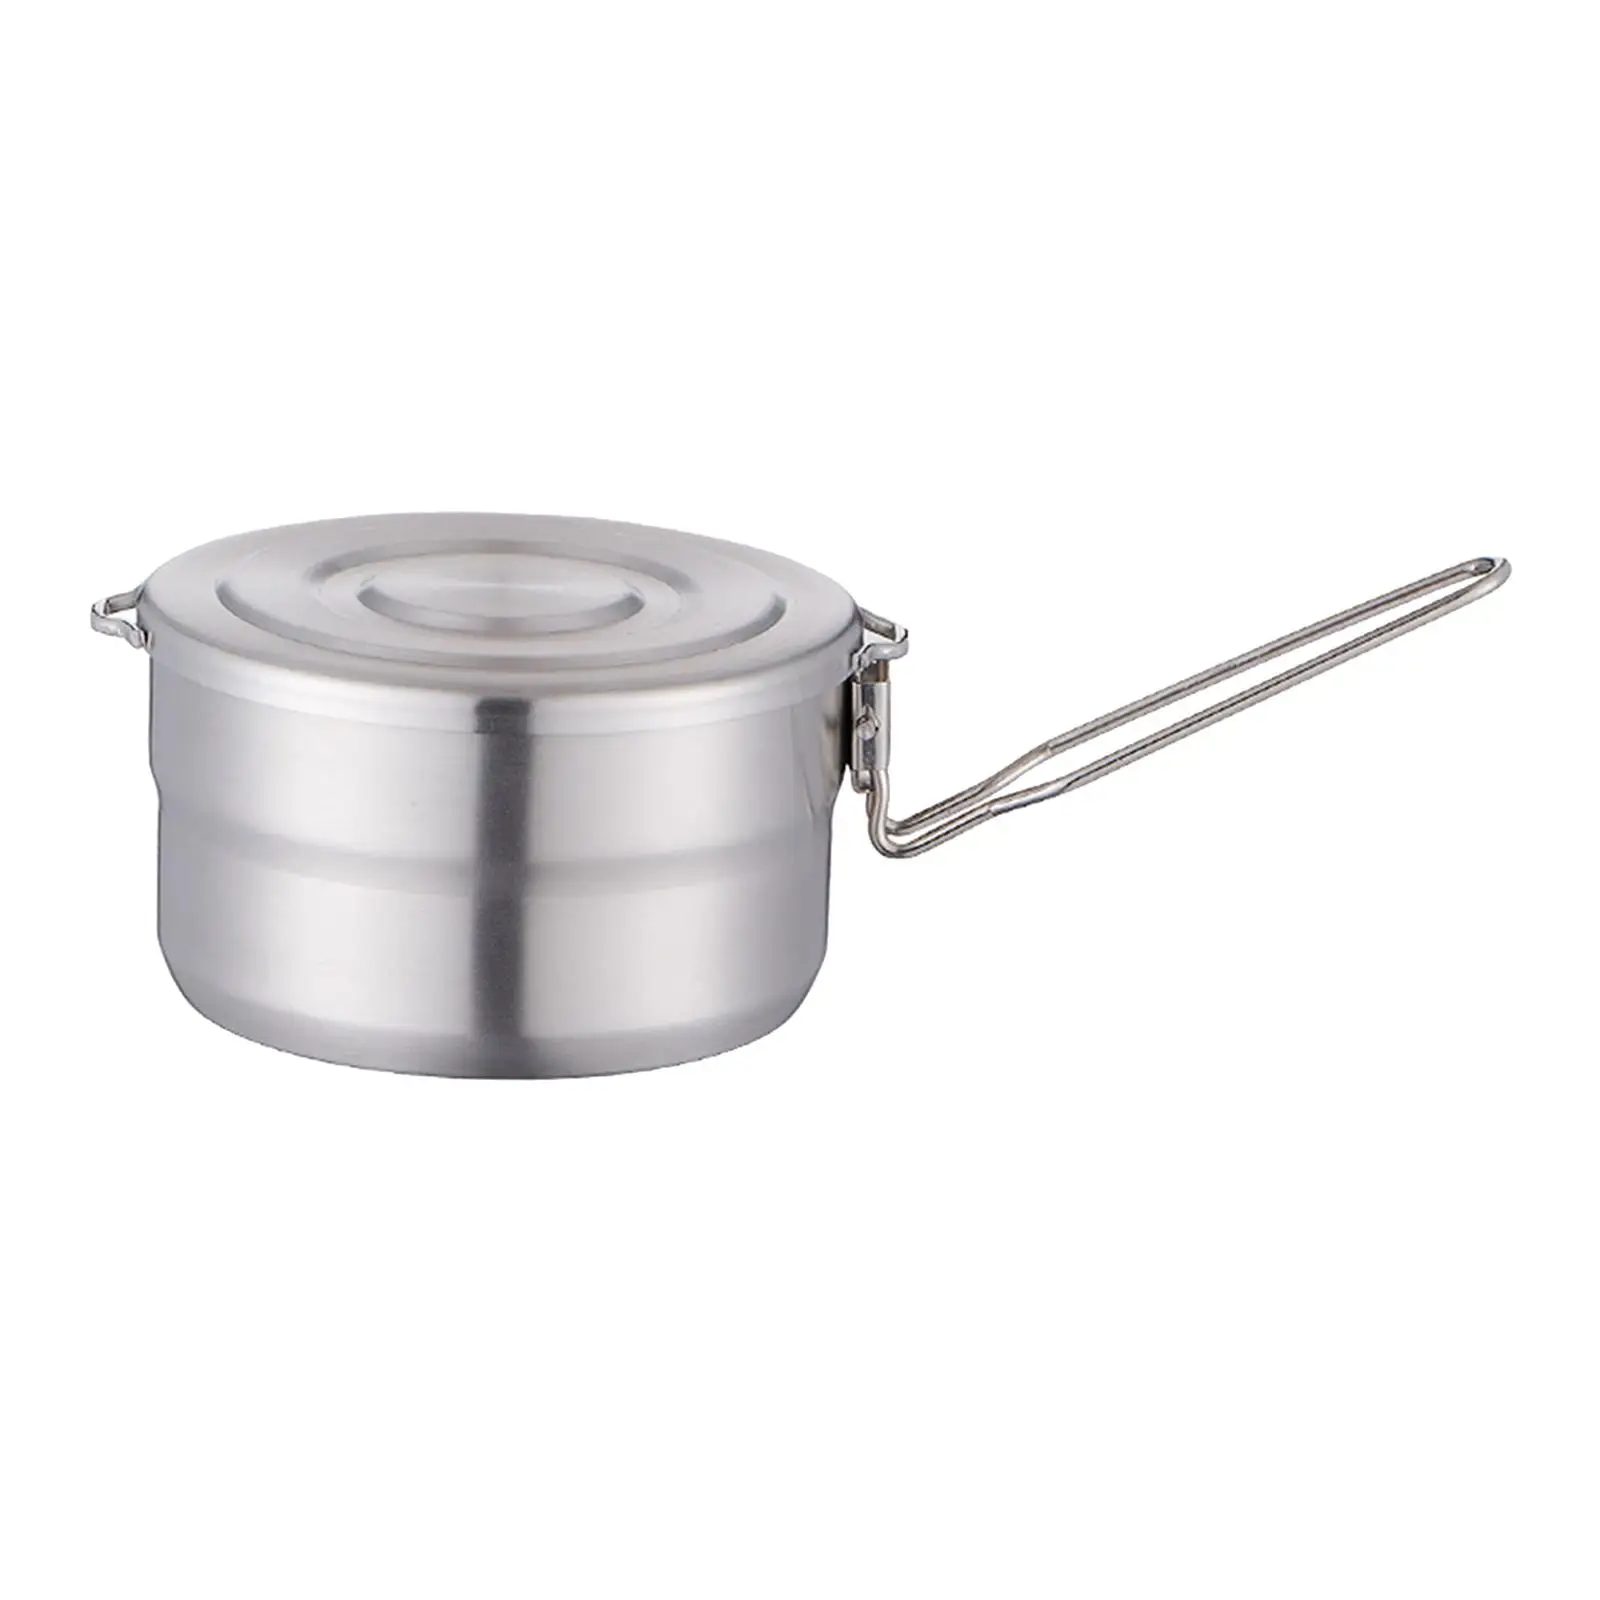 Stainless Steel Camping Cook Pot with Lid and Folding Handle